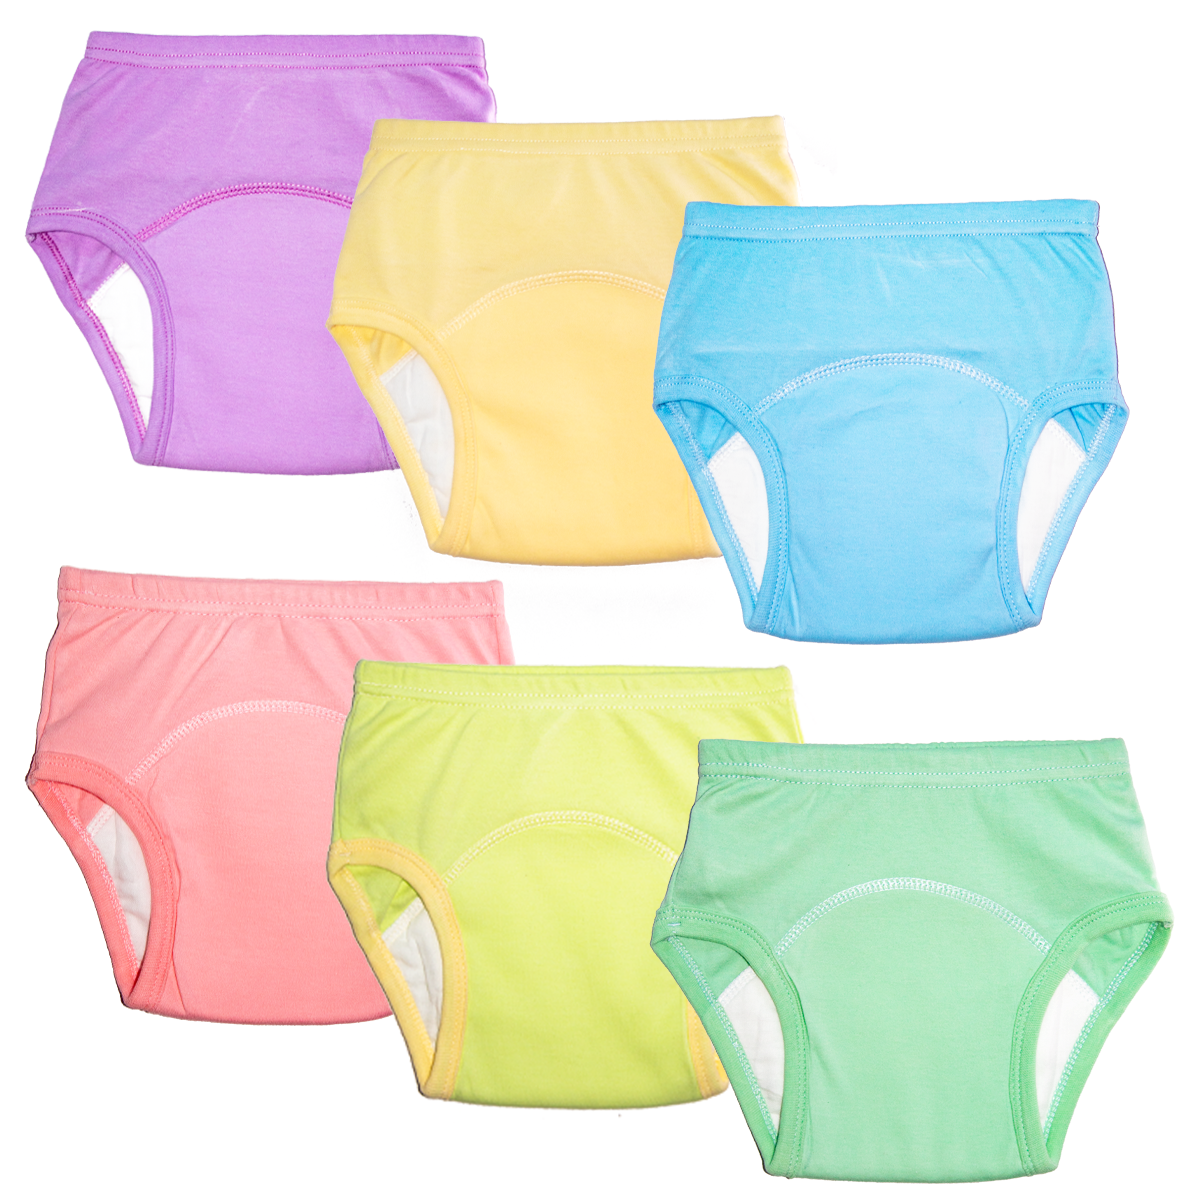 Potty Training Pants for Girls, 6 Pack Solid Colors Training Underwear(1T2T3T4T)